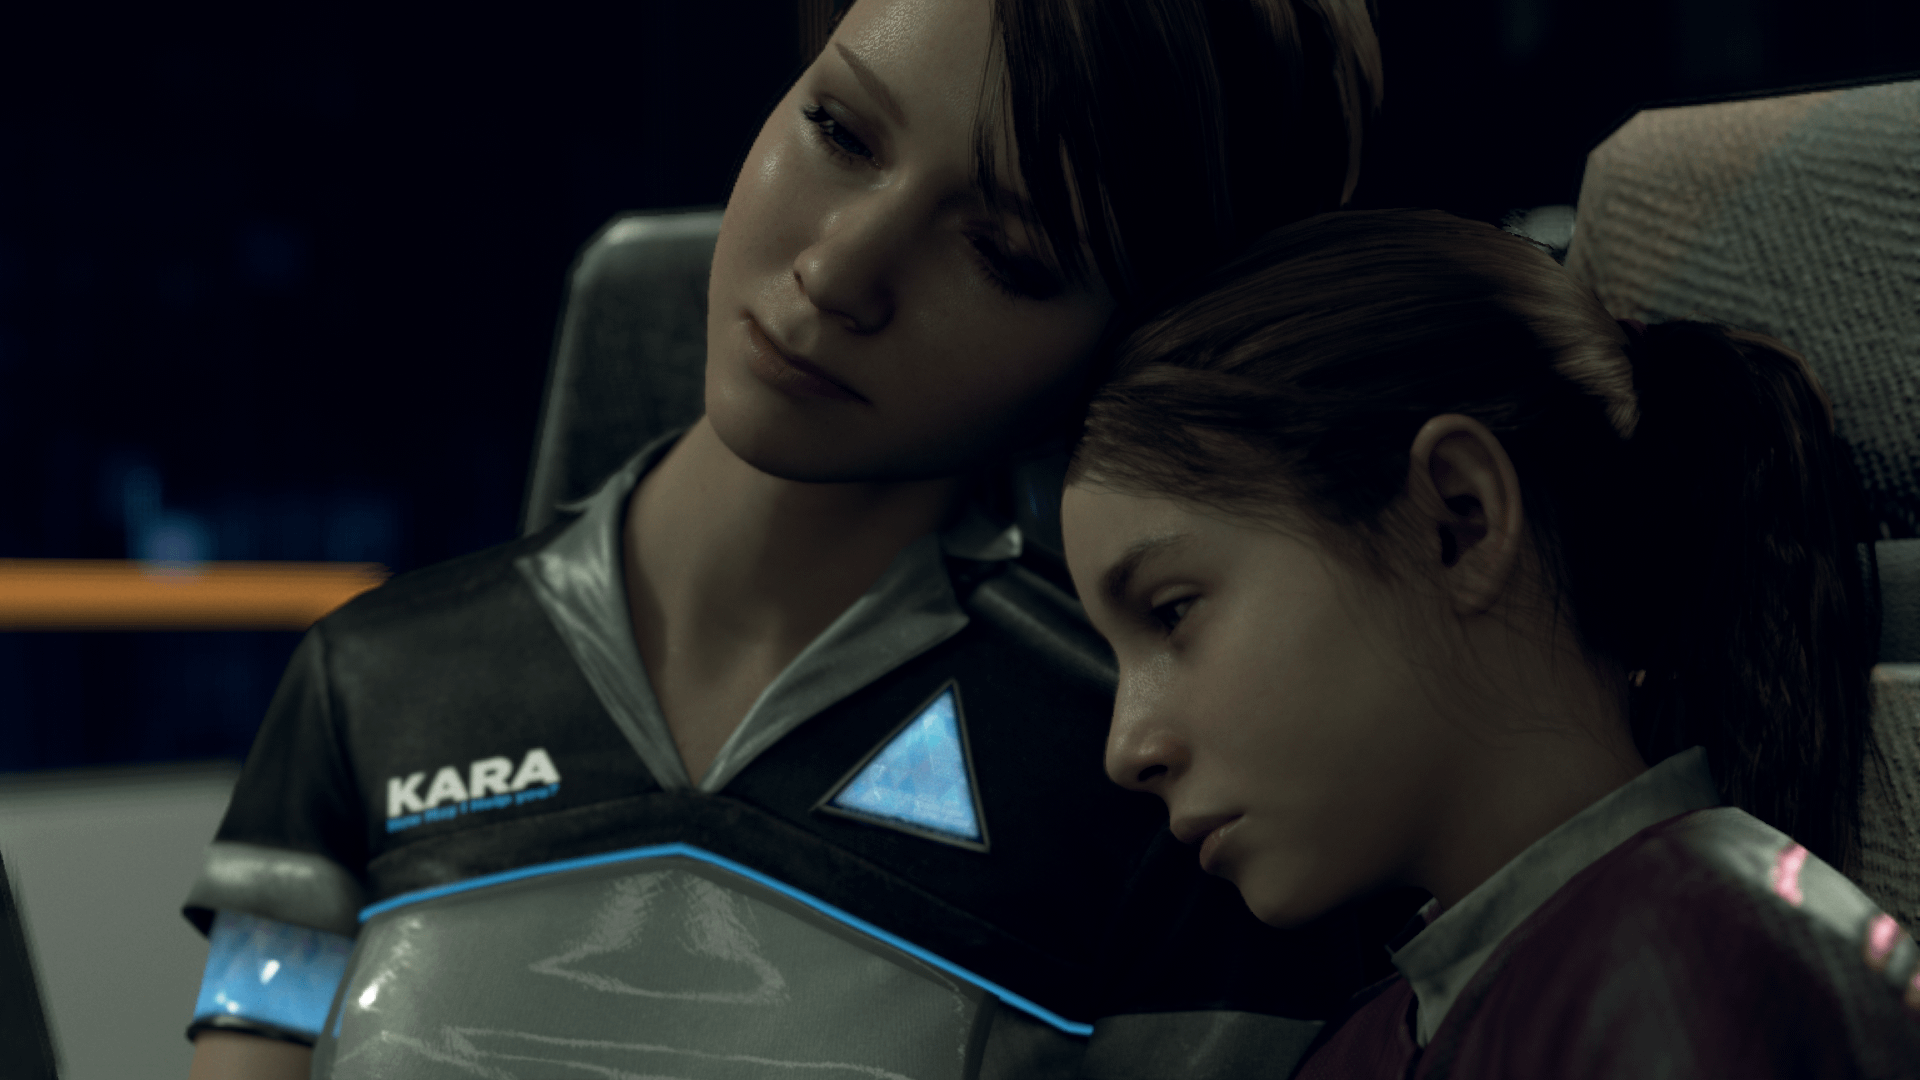 Review: 'Detroit: Become Human' is enthralling flawed